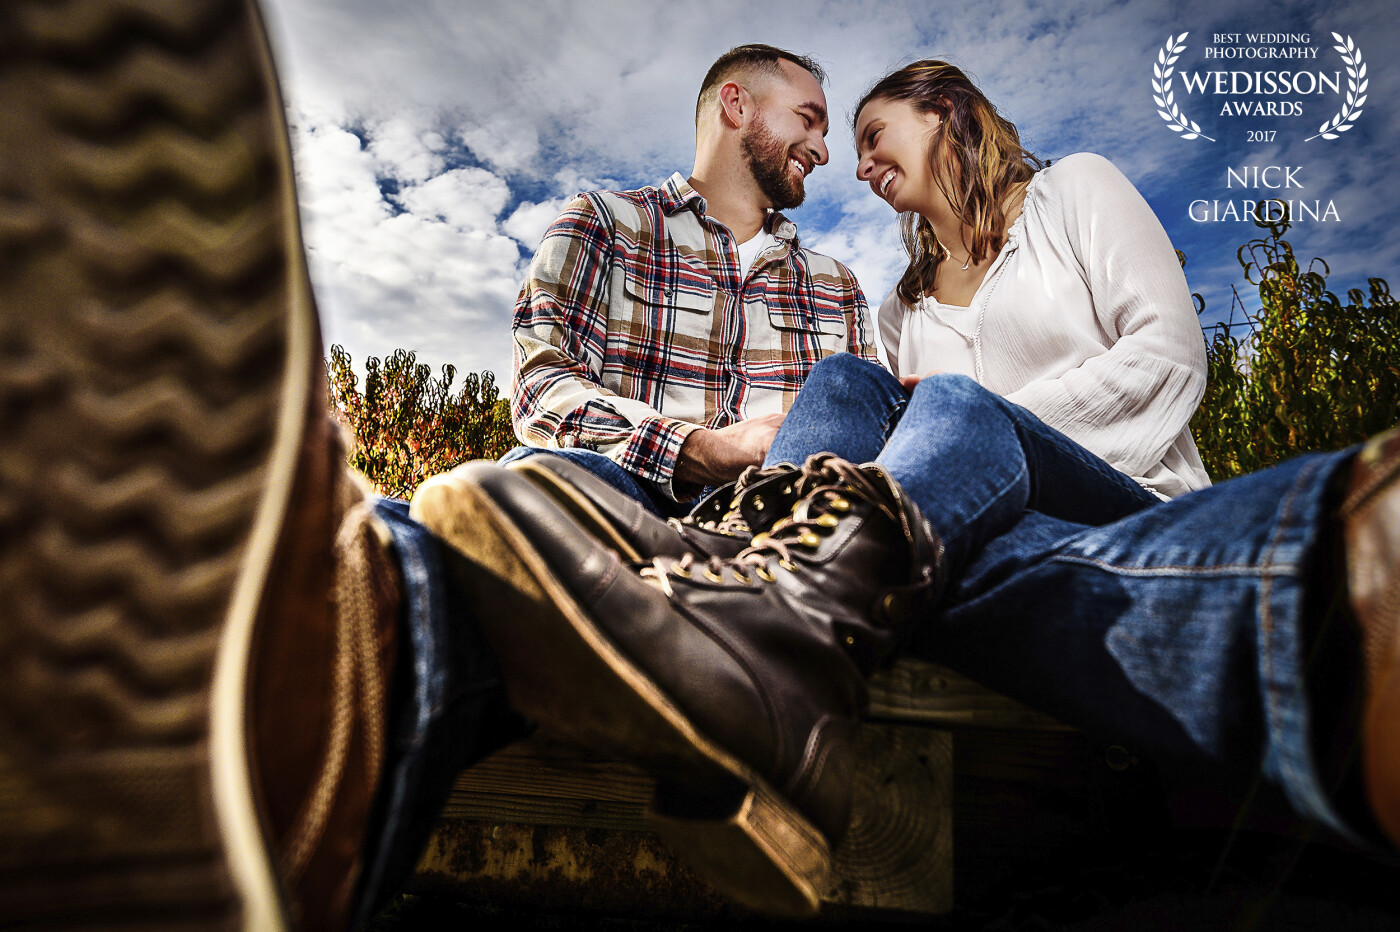 Jessica and Eric wanted to shoot their engagement session at an apple orchard that they have frequented together. We saw this really cool apple cart and sat them on it. I knew this needed to be shot super wide and close to Eric's boot. I think the final image has sole!